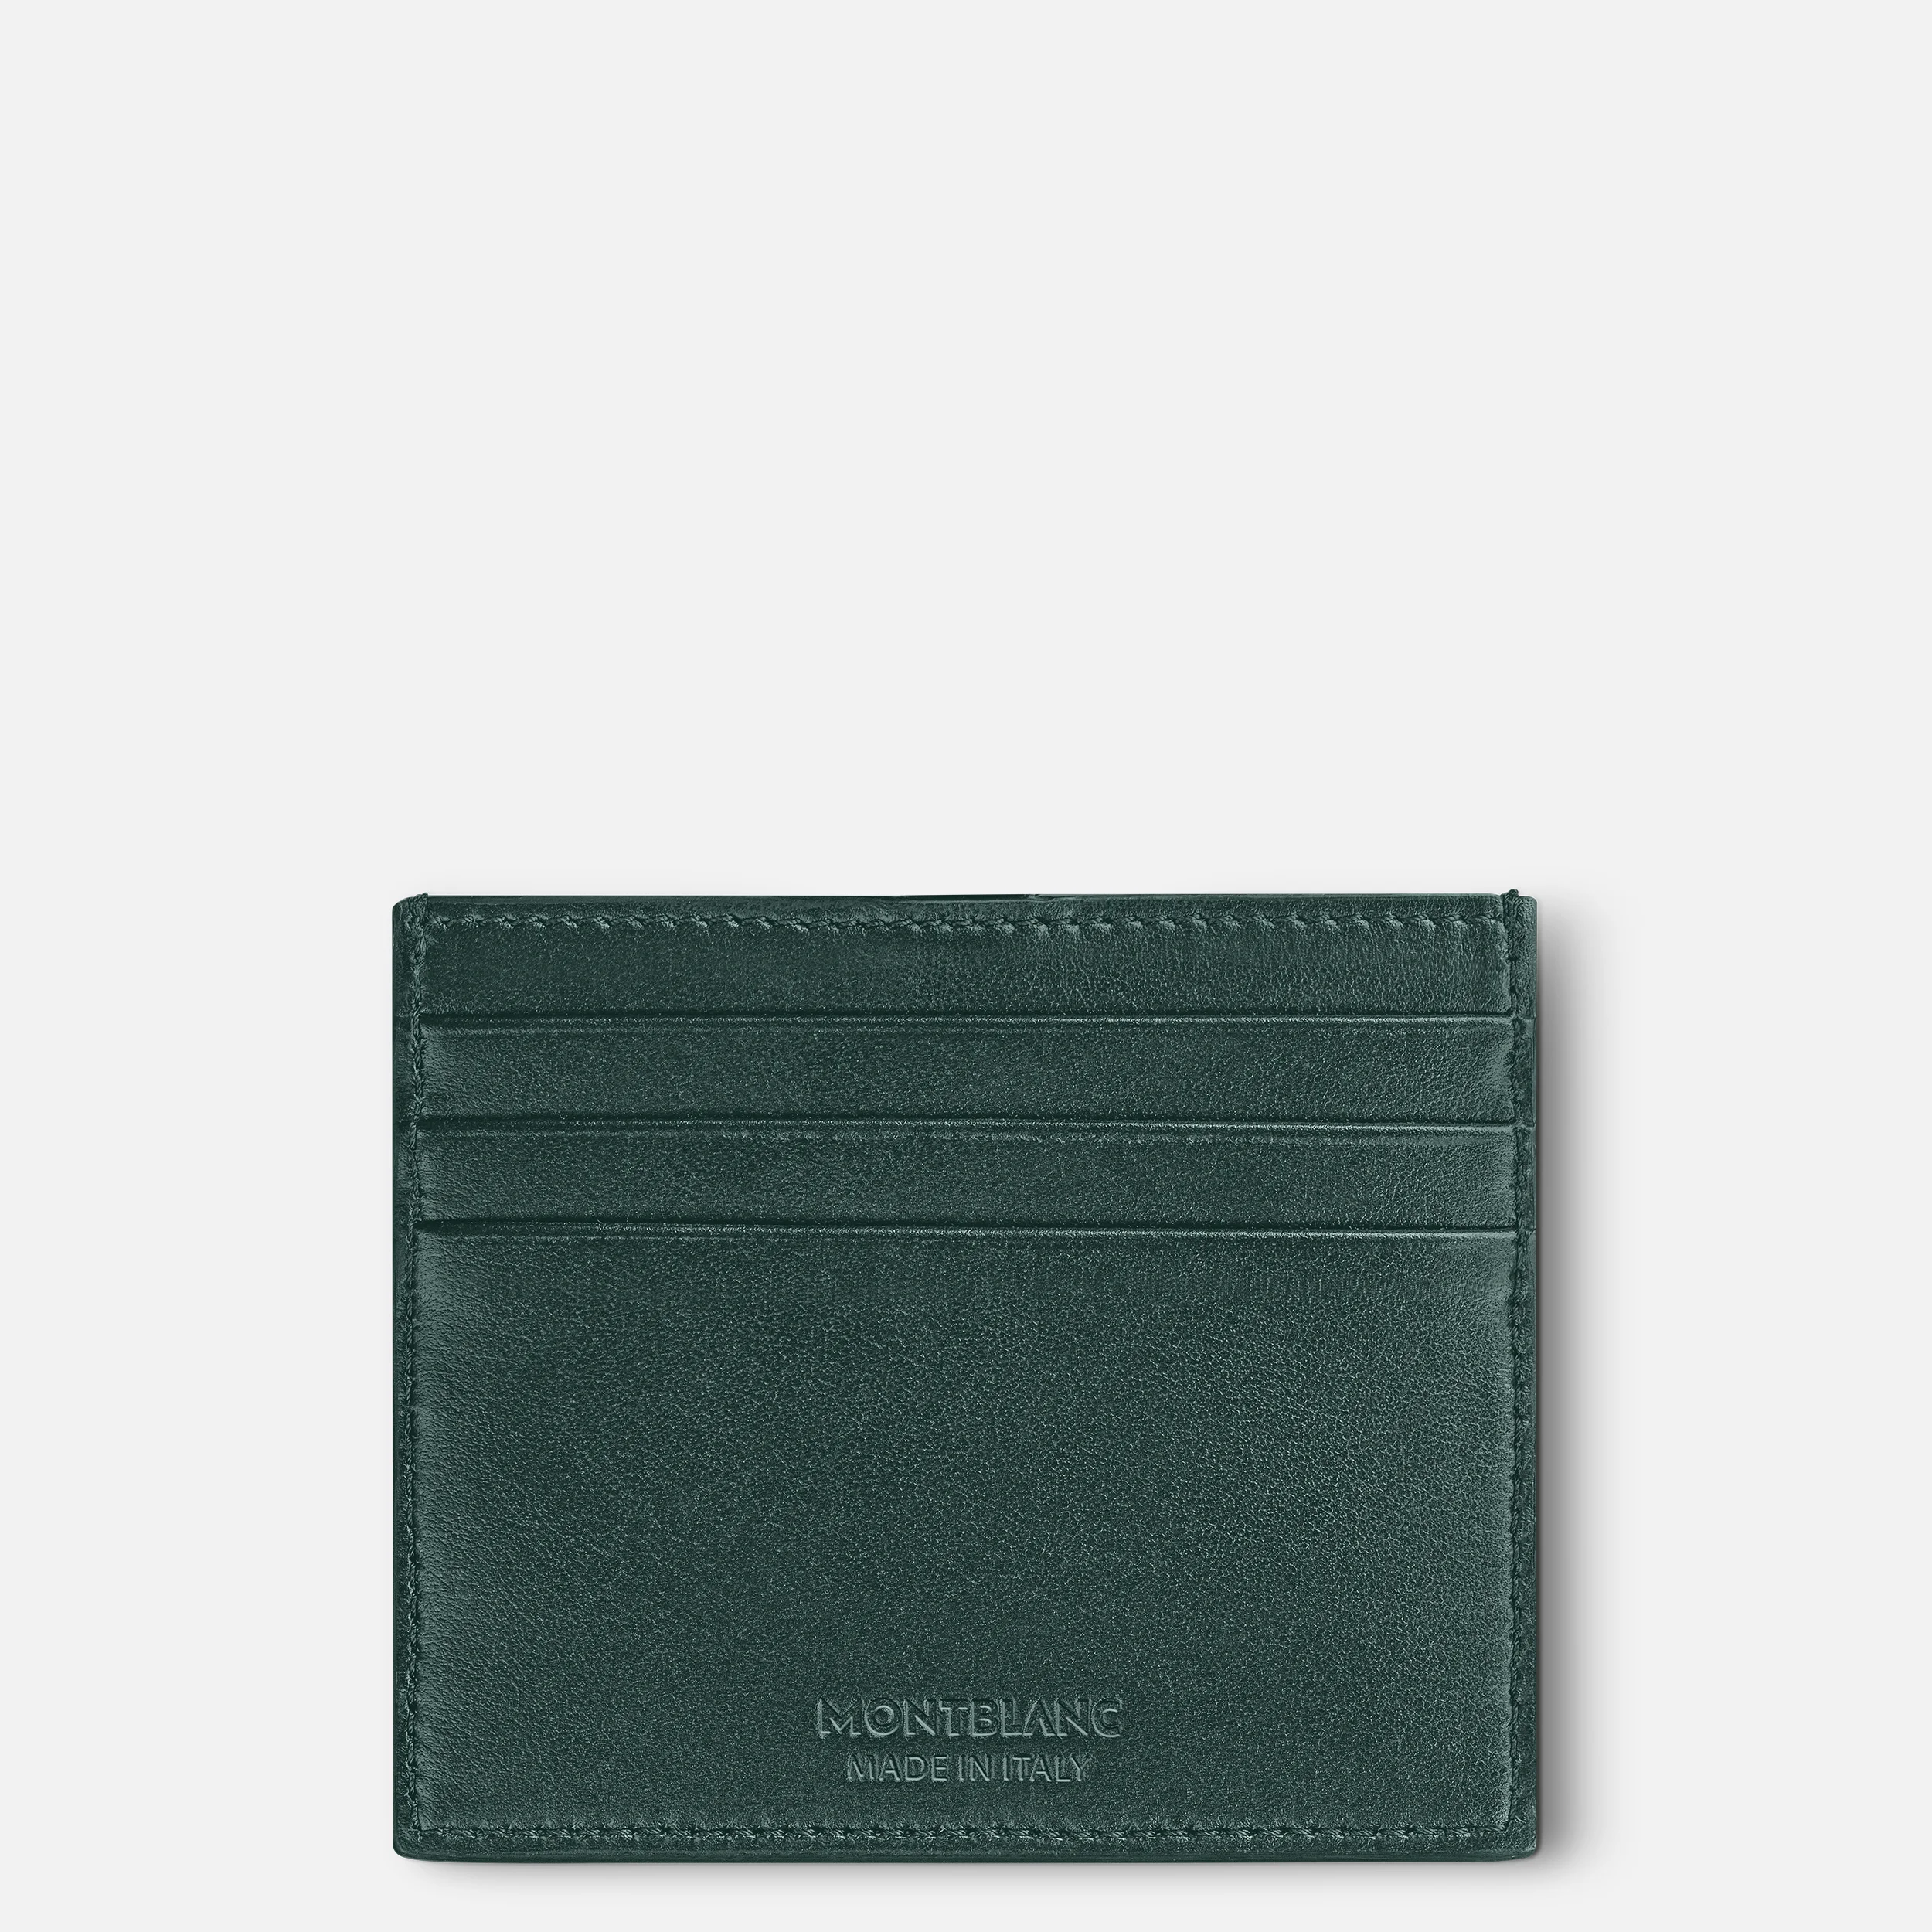 MONTBLANC EXTREME 3.0 CARD HOLDER 6CC British Green - Pencraft the boutique